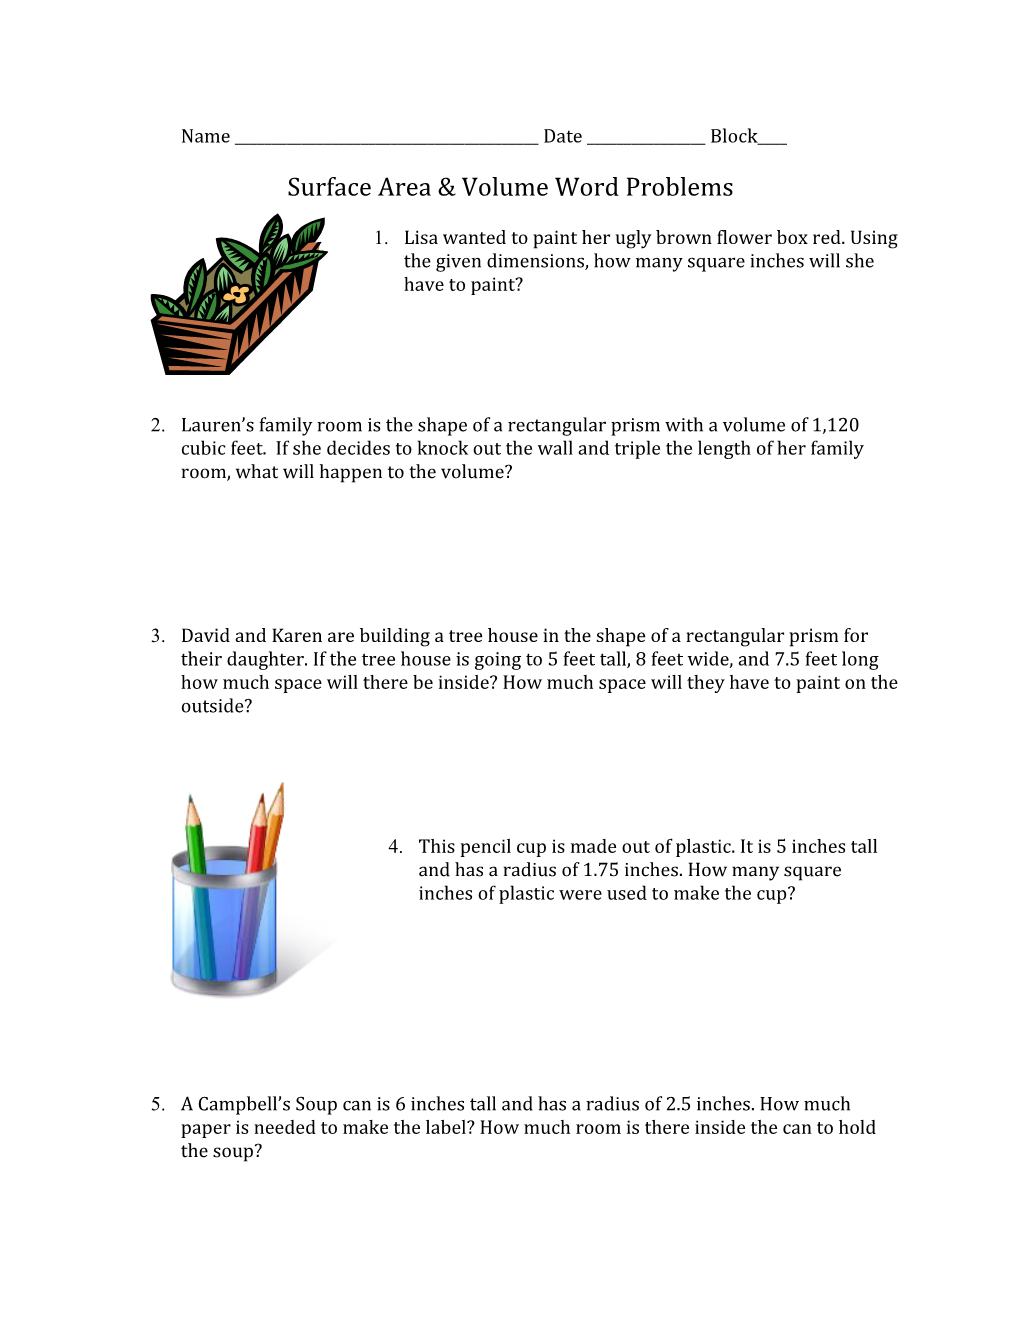 Surface Area & Volume Word Problems s1